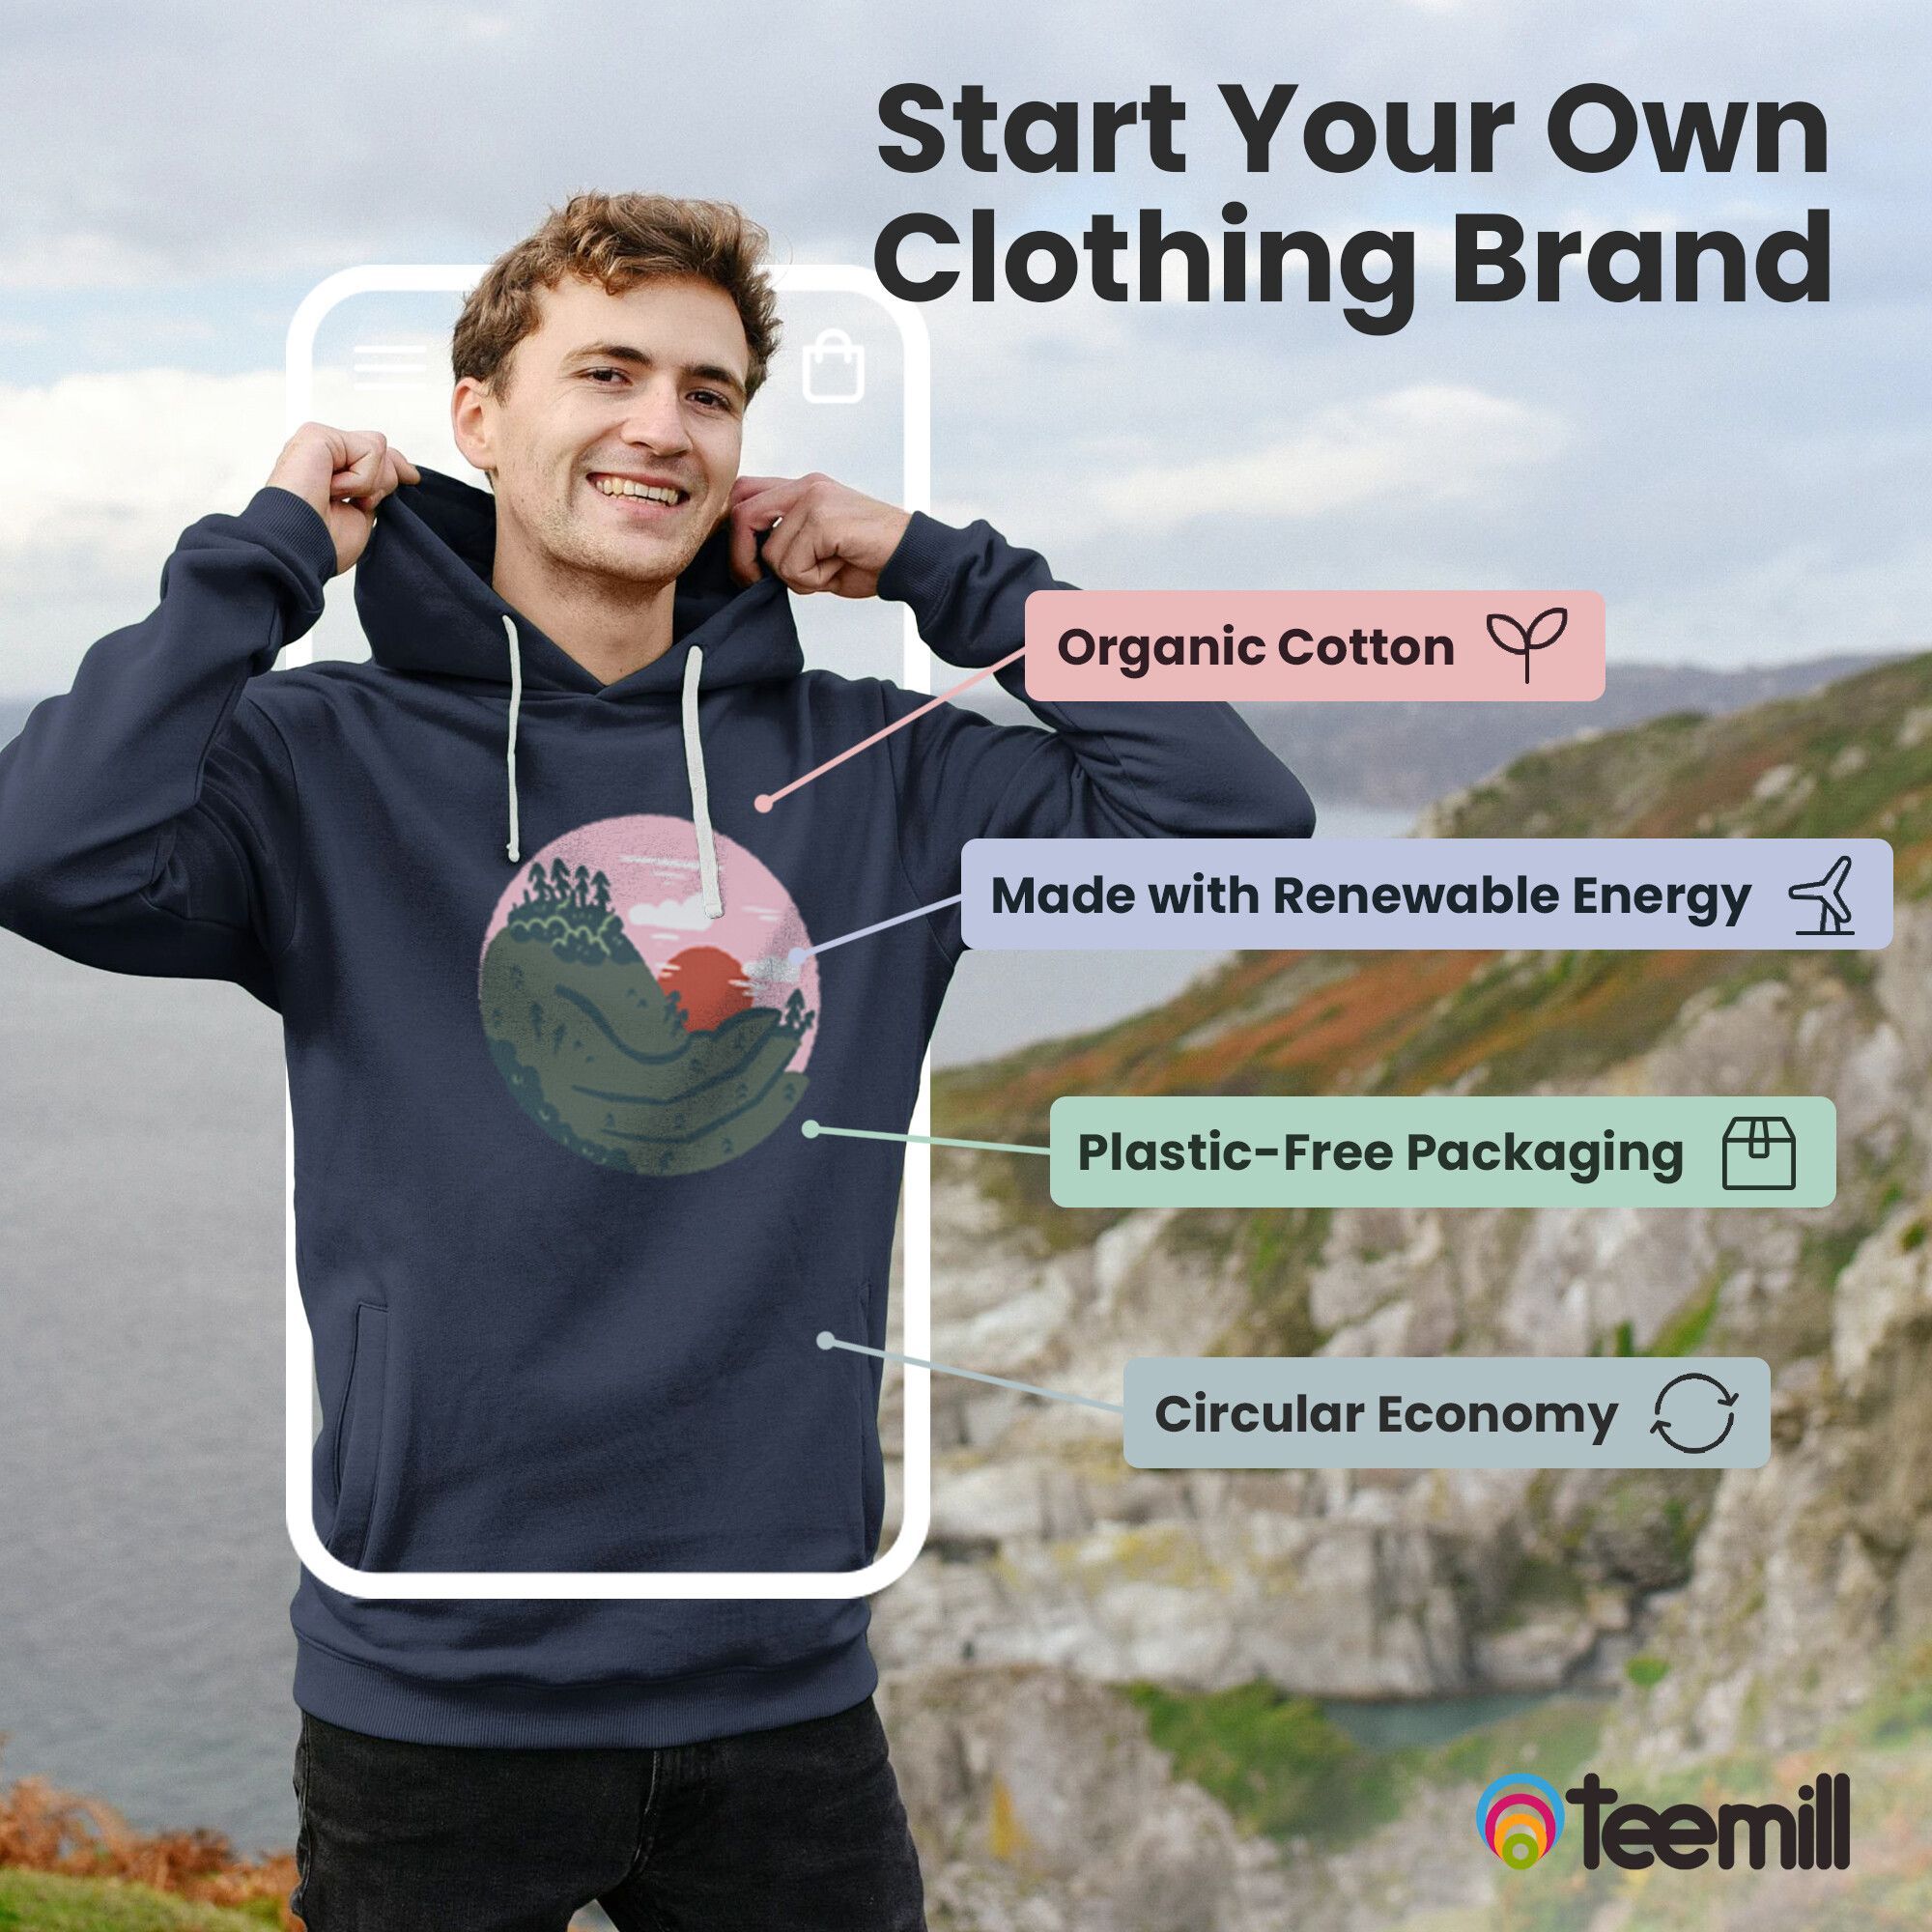 Start Your Own
Clothing Brand, check out TeeMill.com - 
Organic Cotton clothing, Made with Renewable Energy, delivered in Plastic-Free Packaging, embrace the circular Economy